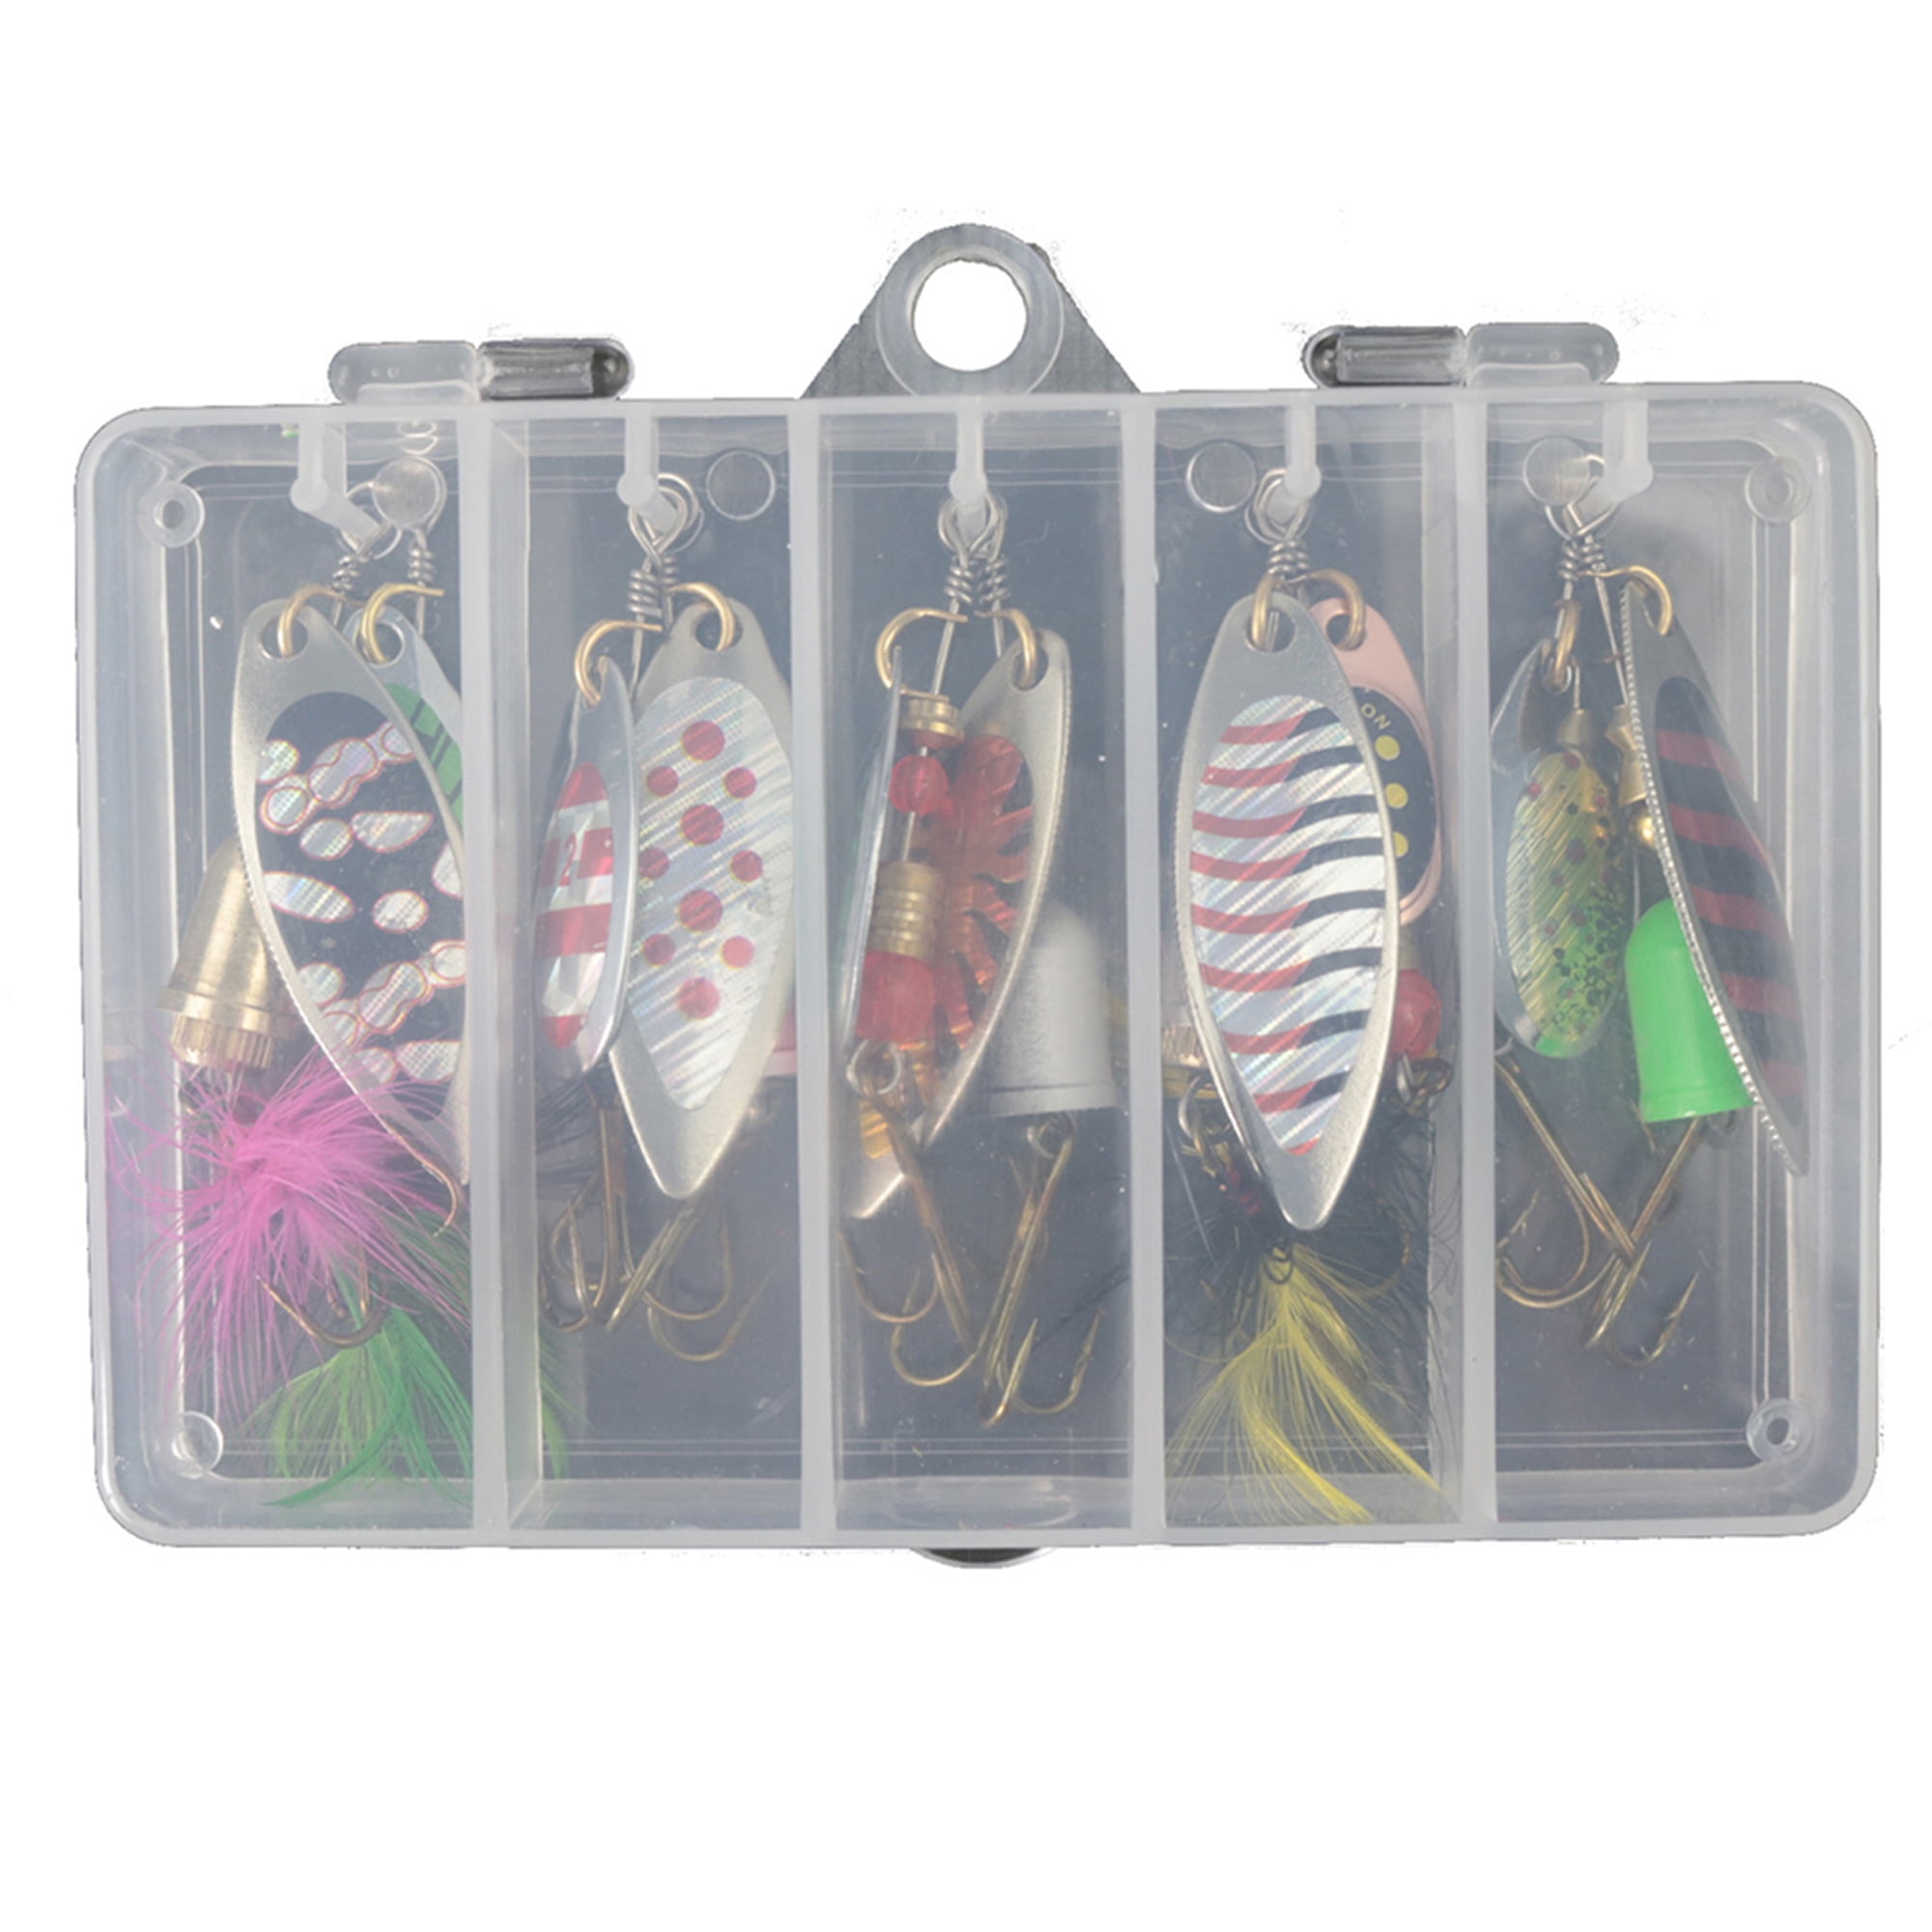 Fishing Spinner Kit 20PCS Spinnerbaits Fishing Spinning Lure Metal Bait  Bass Lures for Bass, Salmon, Pike or Walleye with Portable Carry Bag